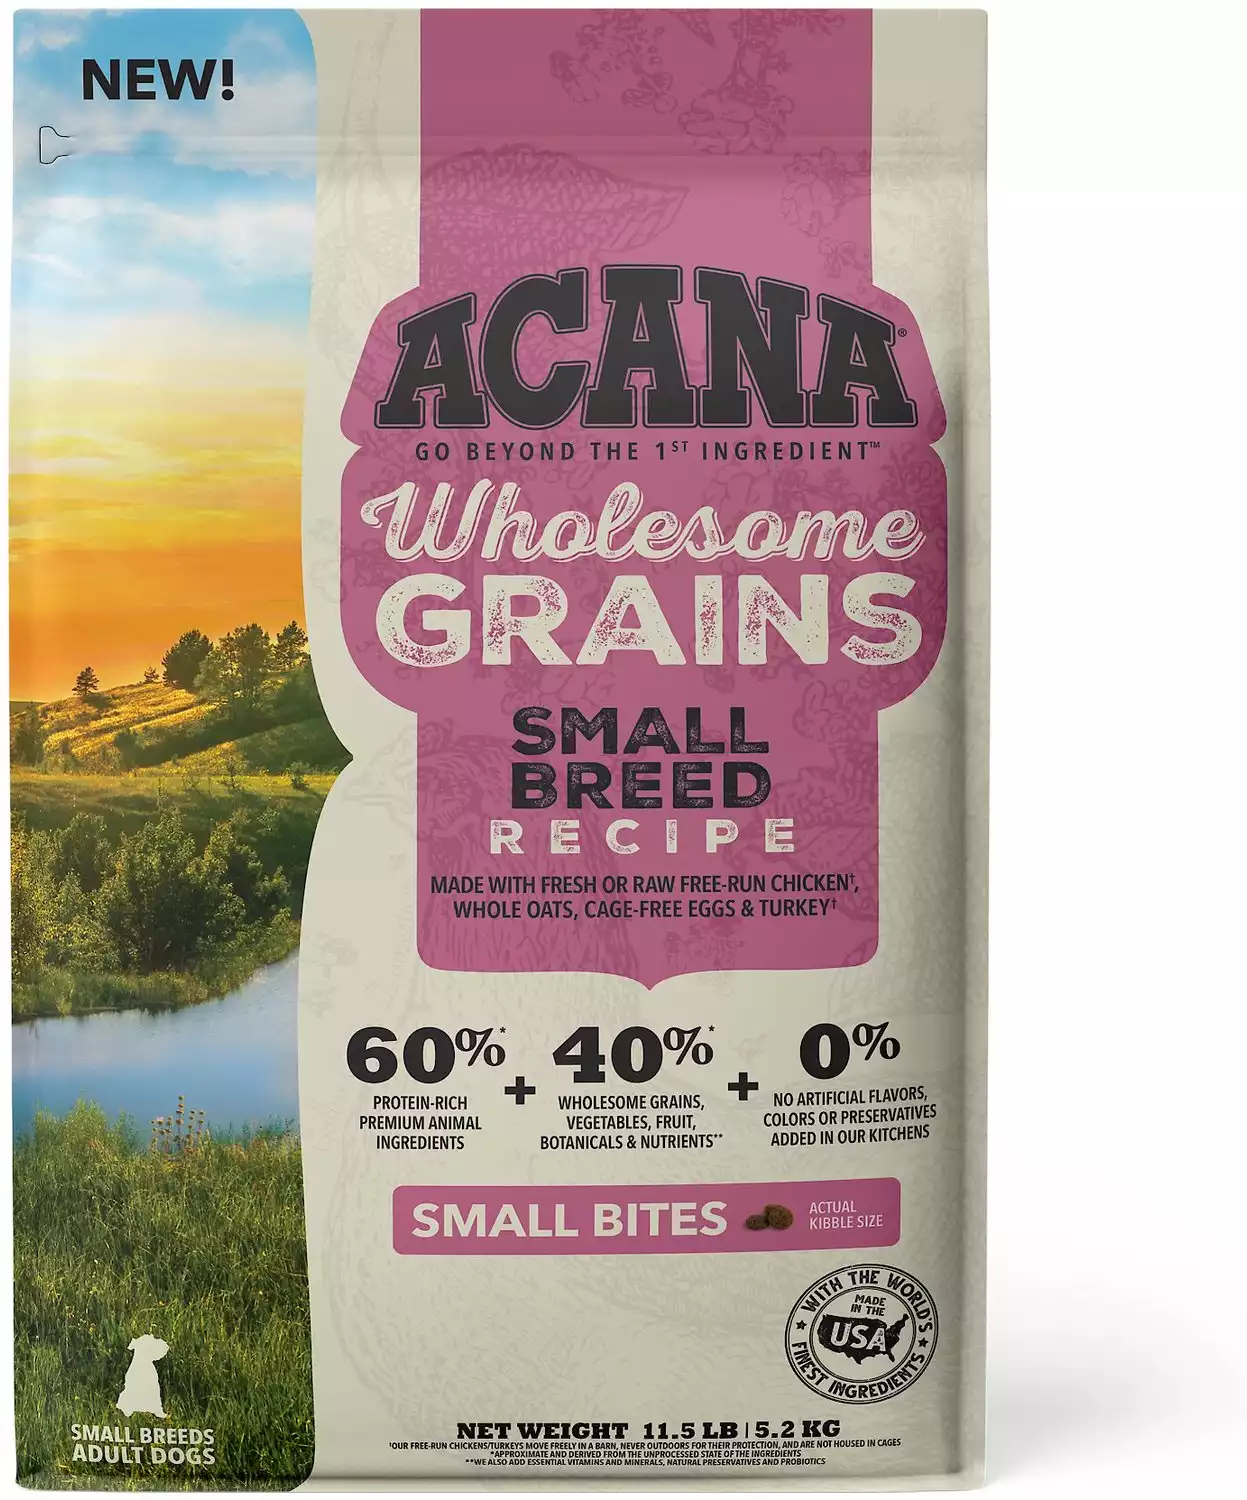 ACANA Wholesome Grains Small Breed Recipe Gluten-Free Dry Dog Food